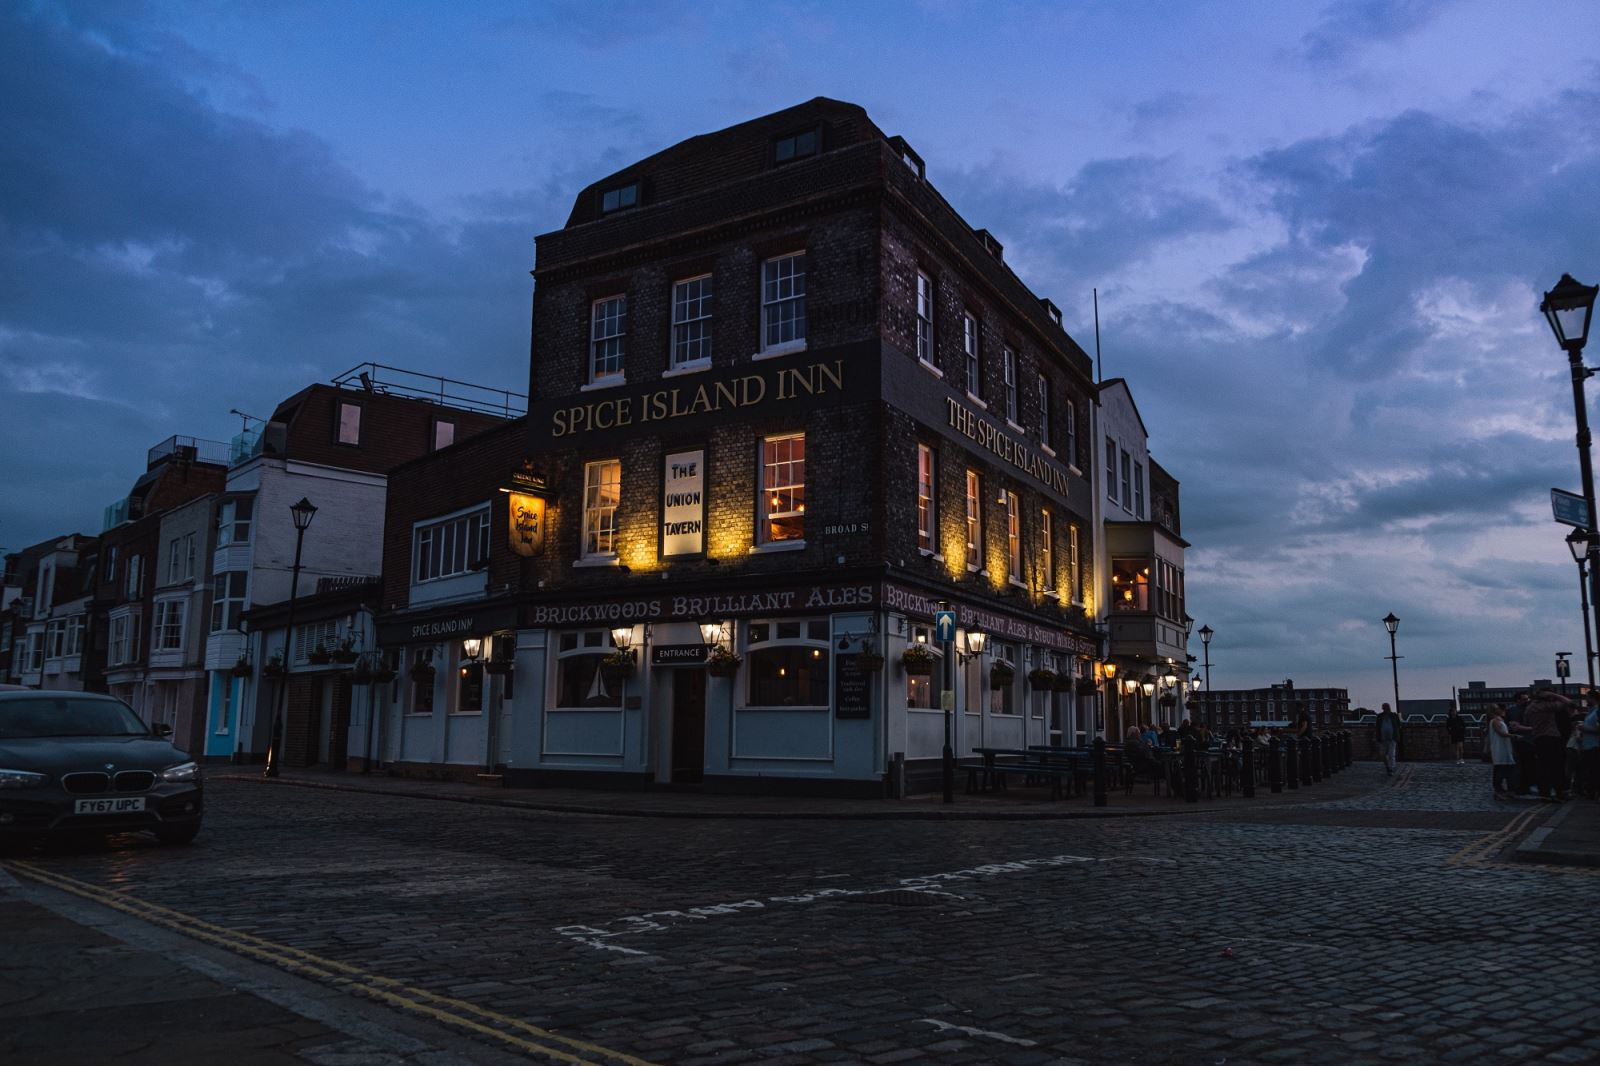 The Spice Island pub in Old Portsmouth by night